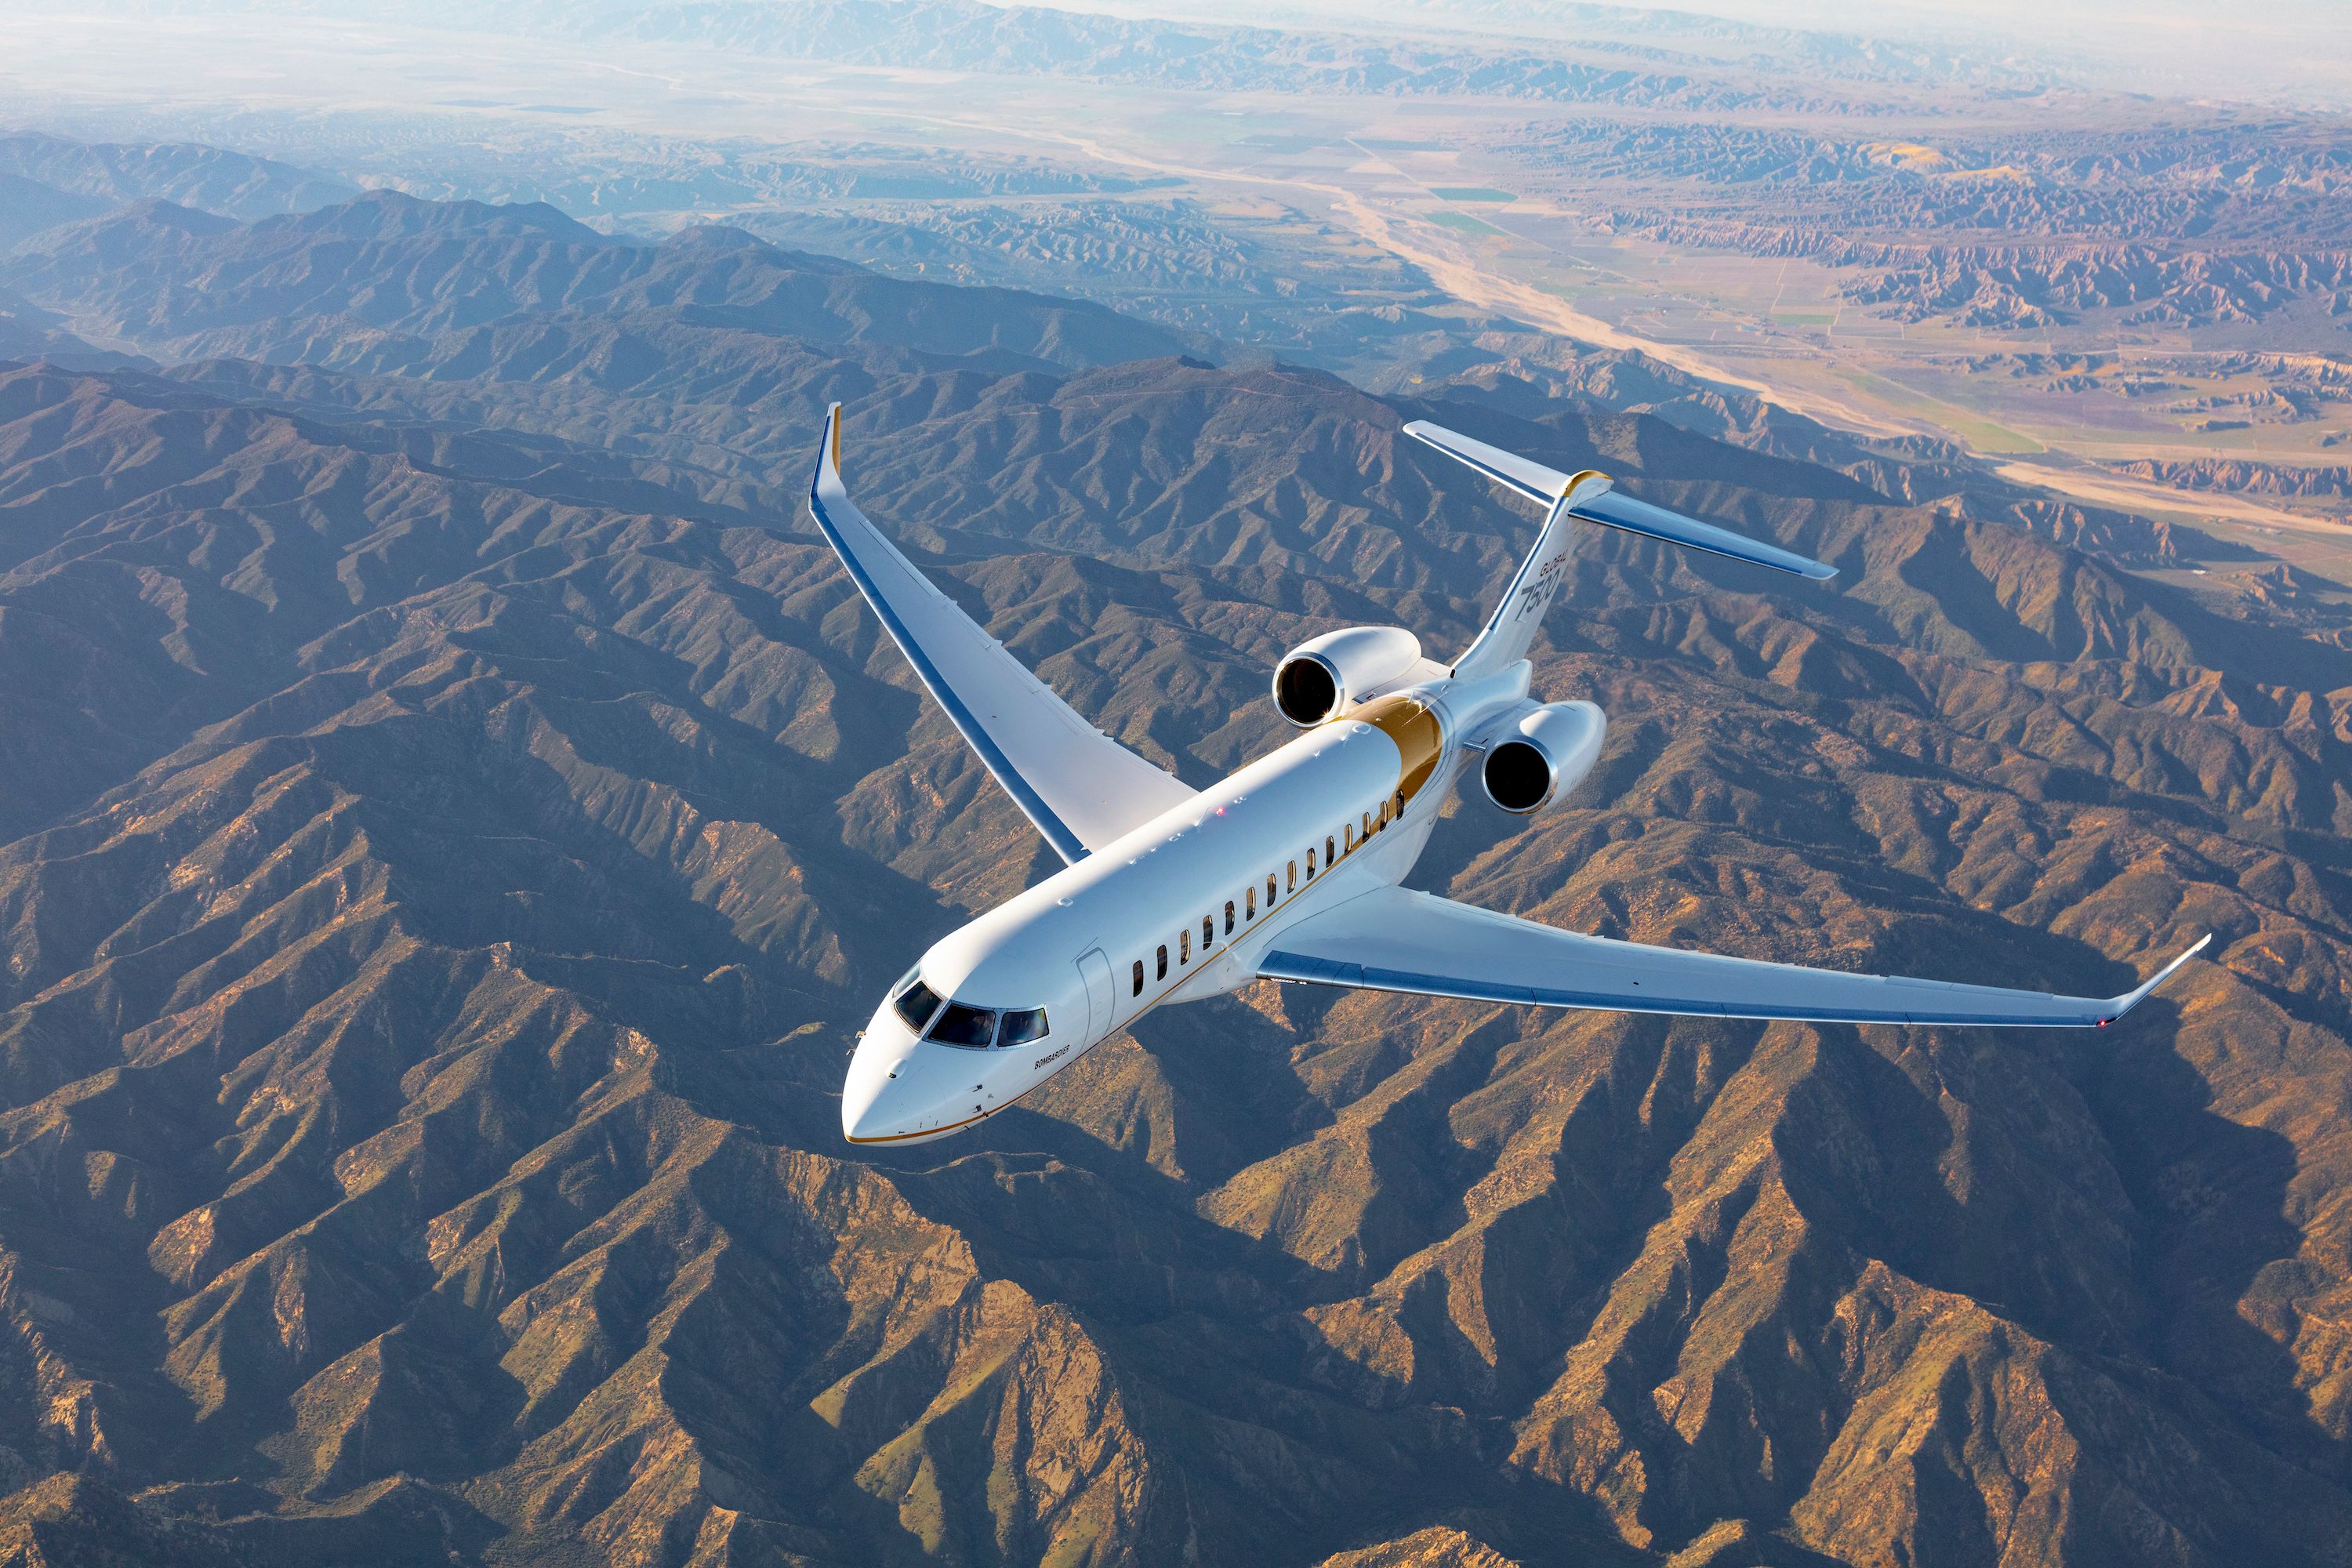 A Bombardier Global 7500 flying in the sky.